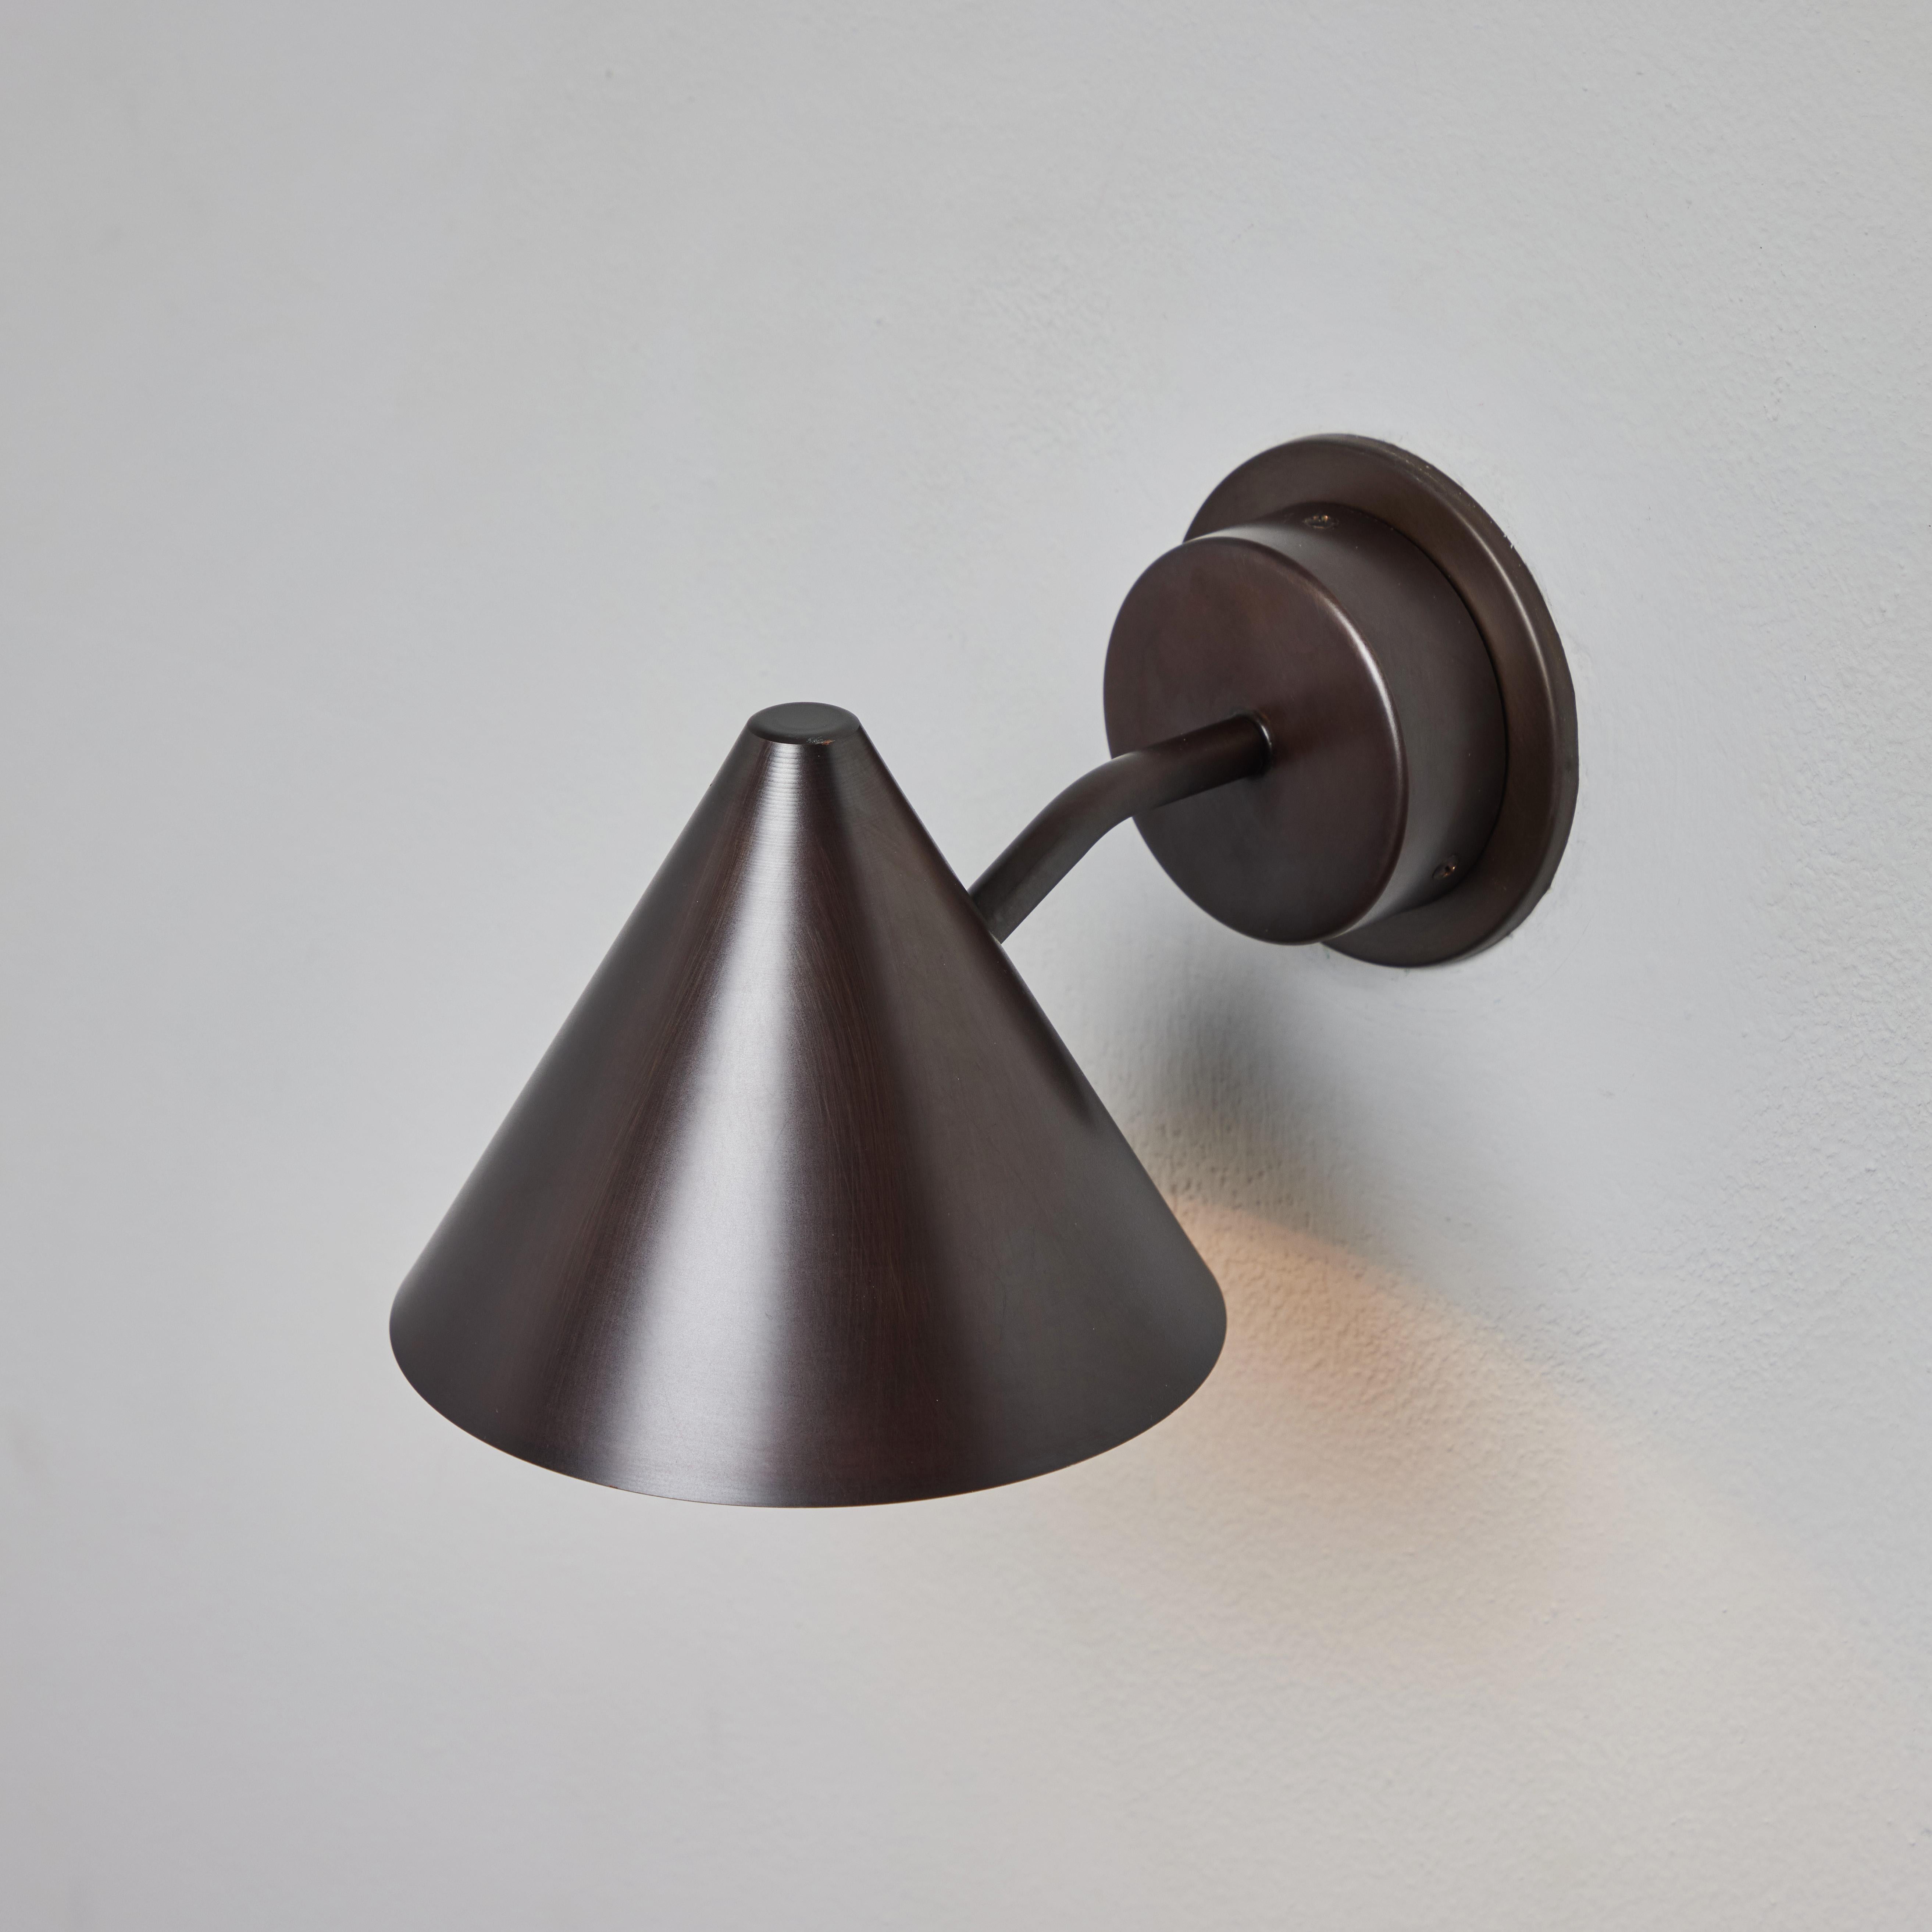 Swedish Pair of Hans-Agne Jakobsson 'Mini-Tratten' Dark Brown Patinated Outdoor Sconces For Sale